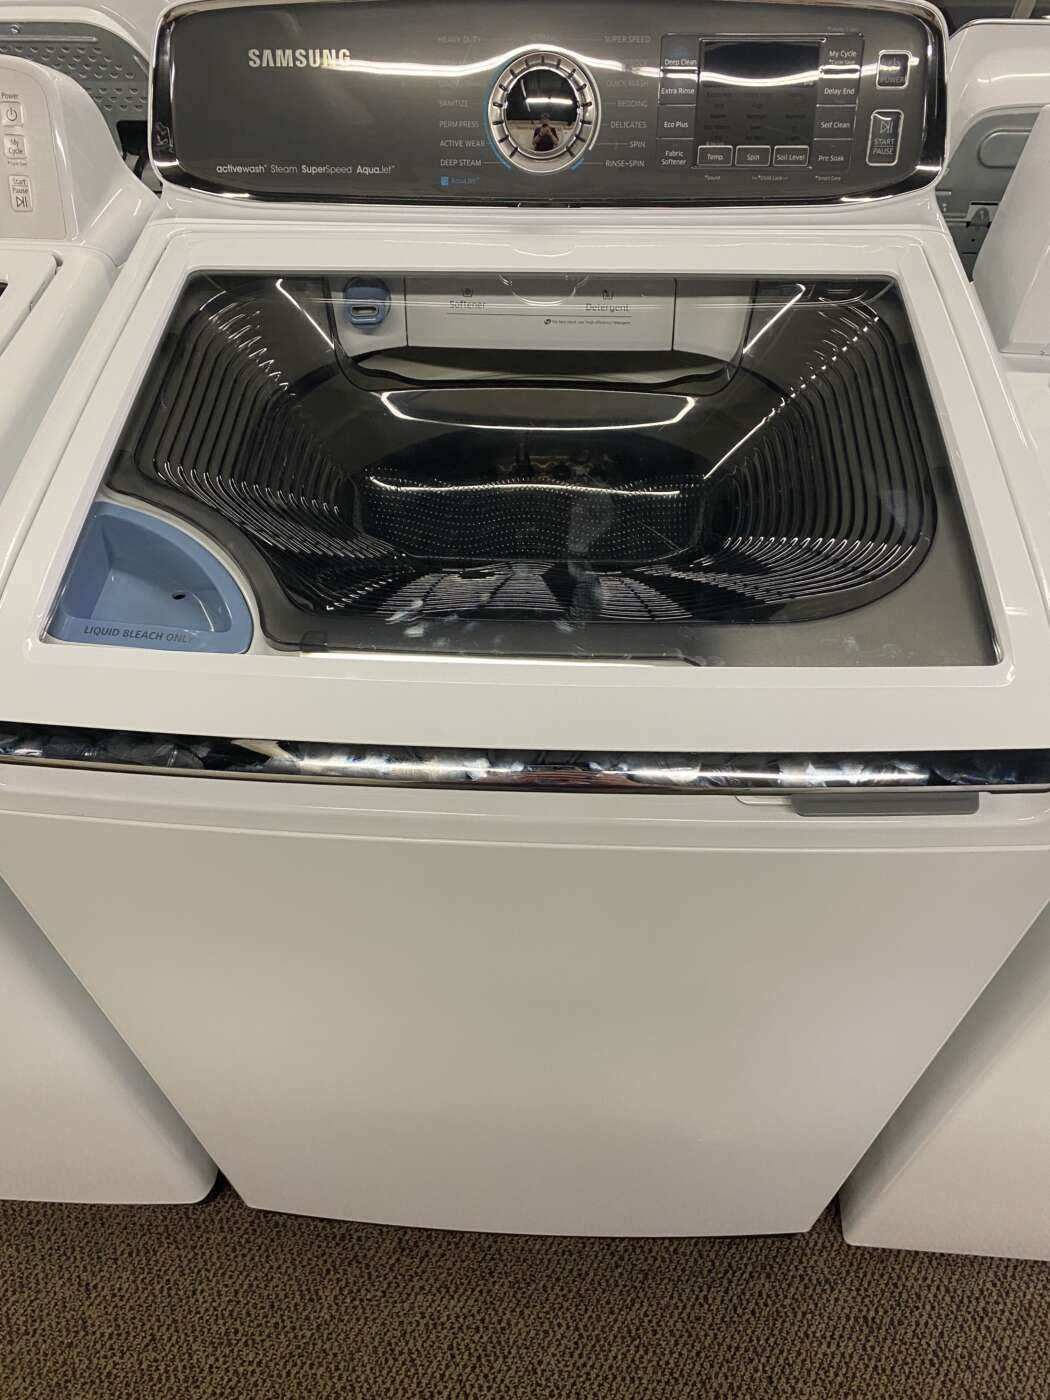 Reconditioned SAMSUNG 5.2 Cu. Ft. Top-Load Washer With Pretreat Basket